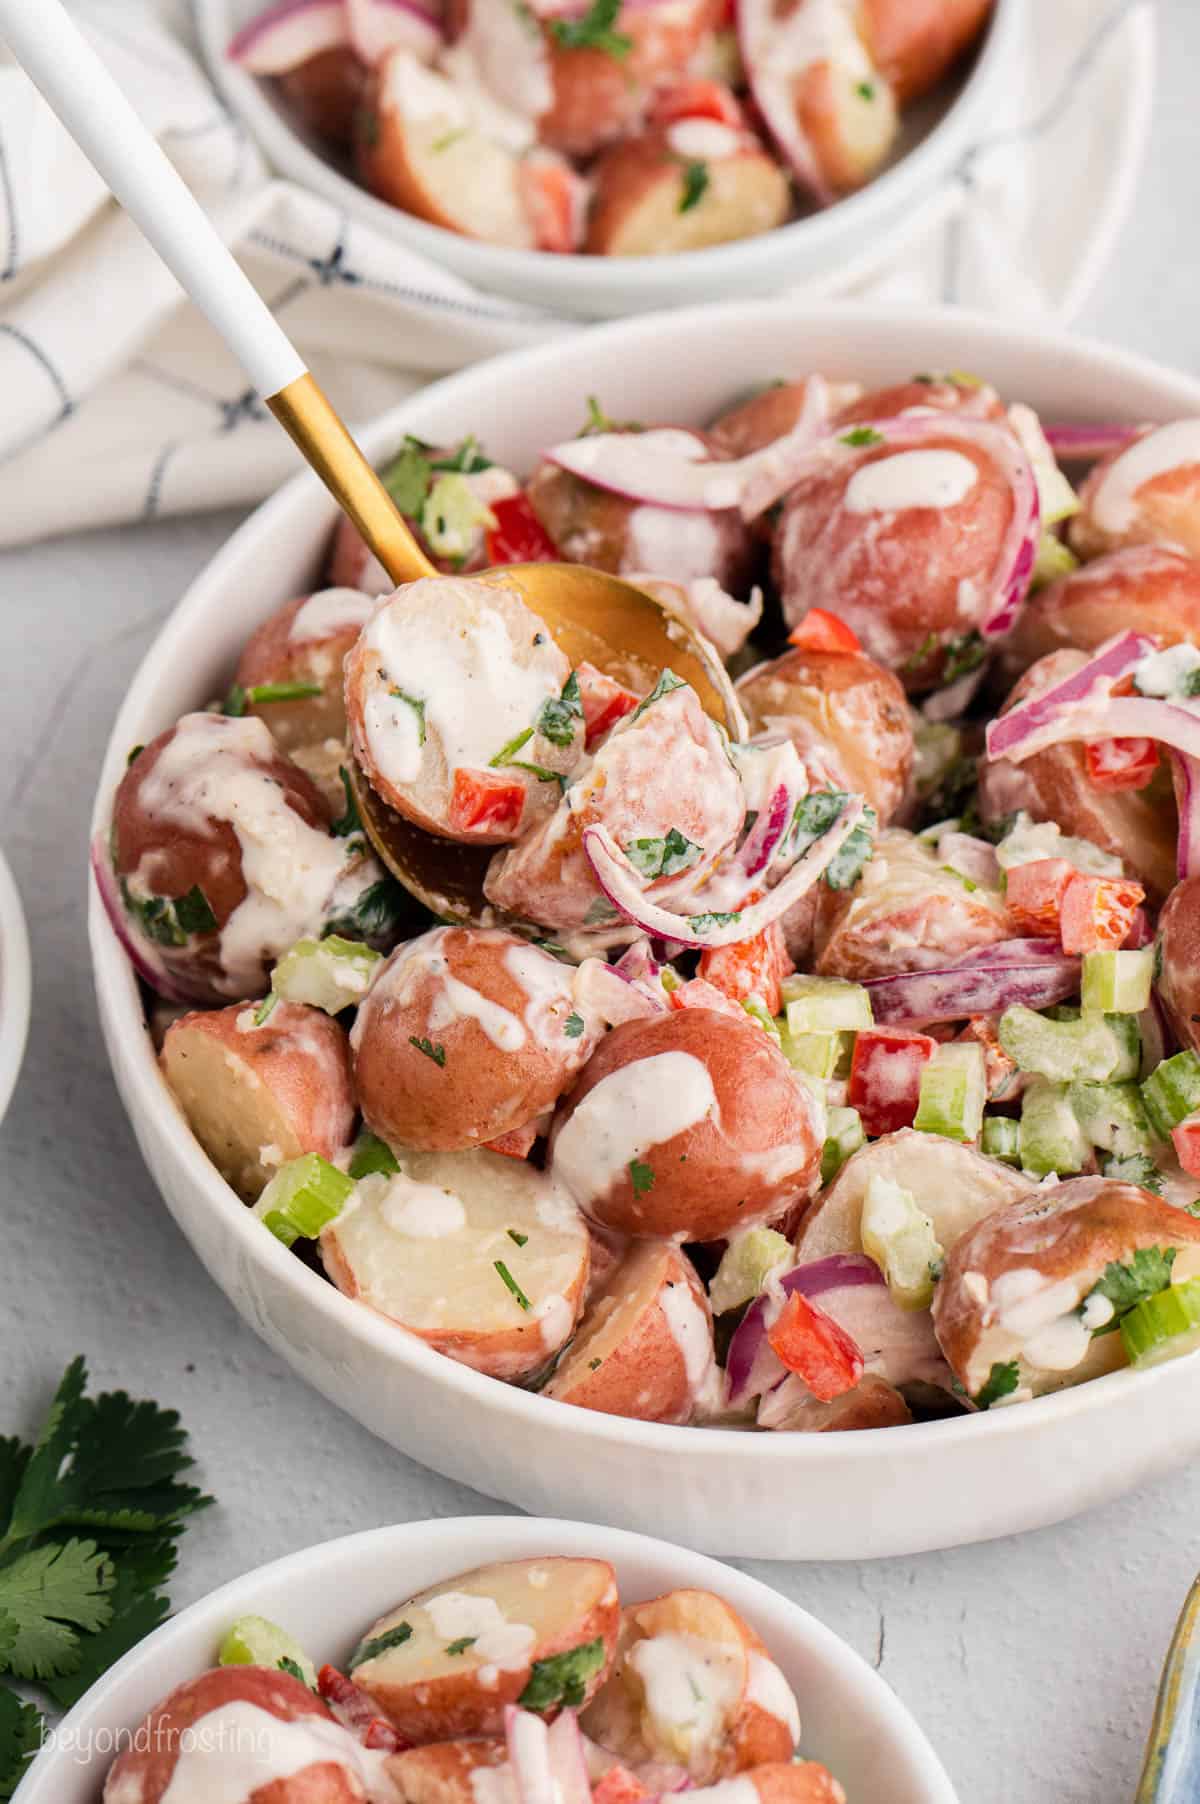 A gold spoon in a big bowl of red potato salad